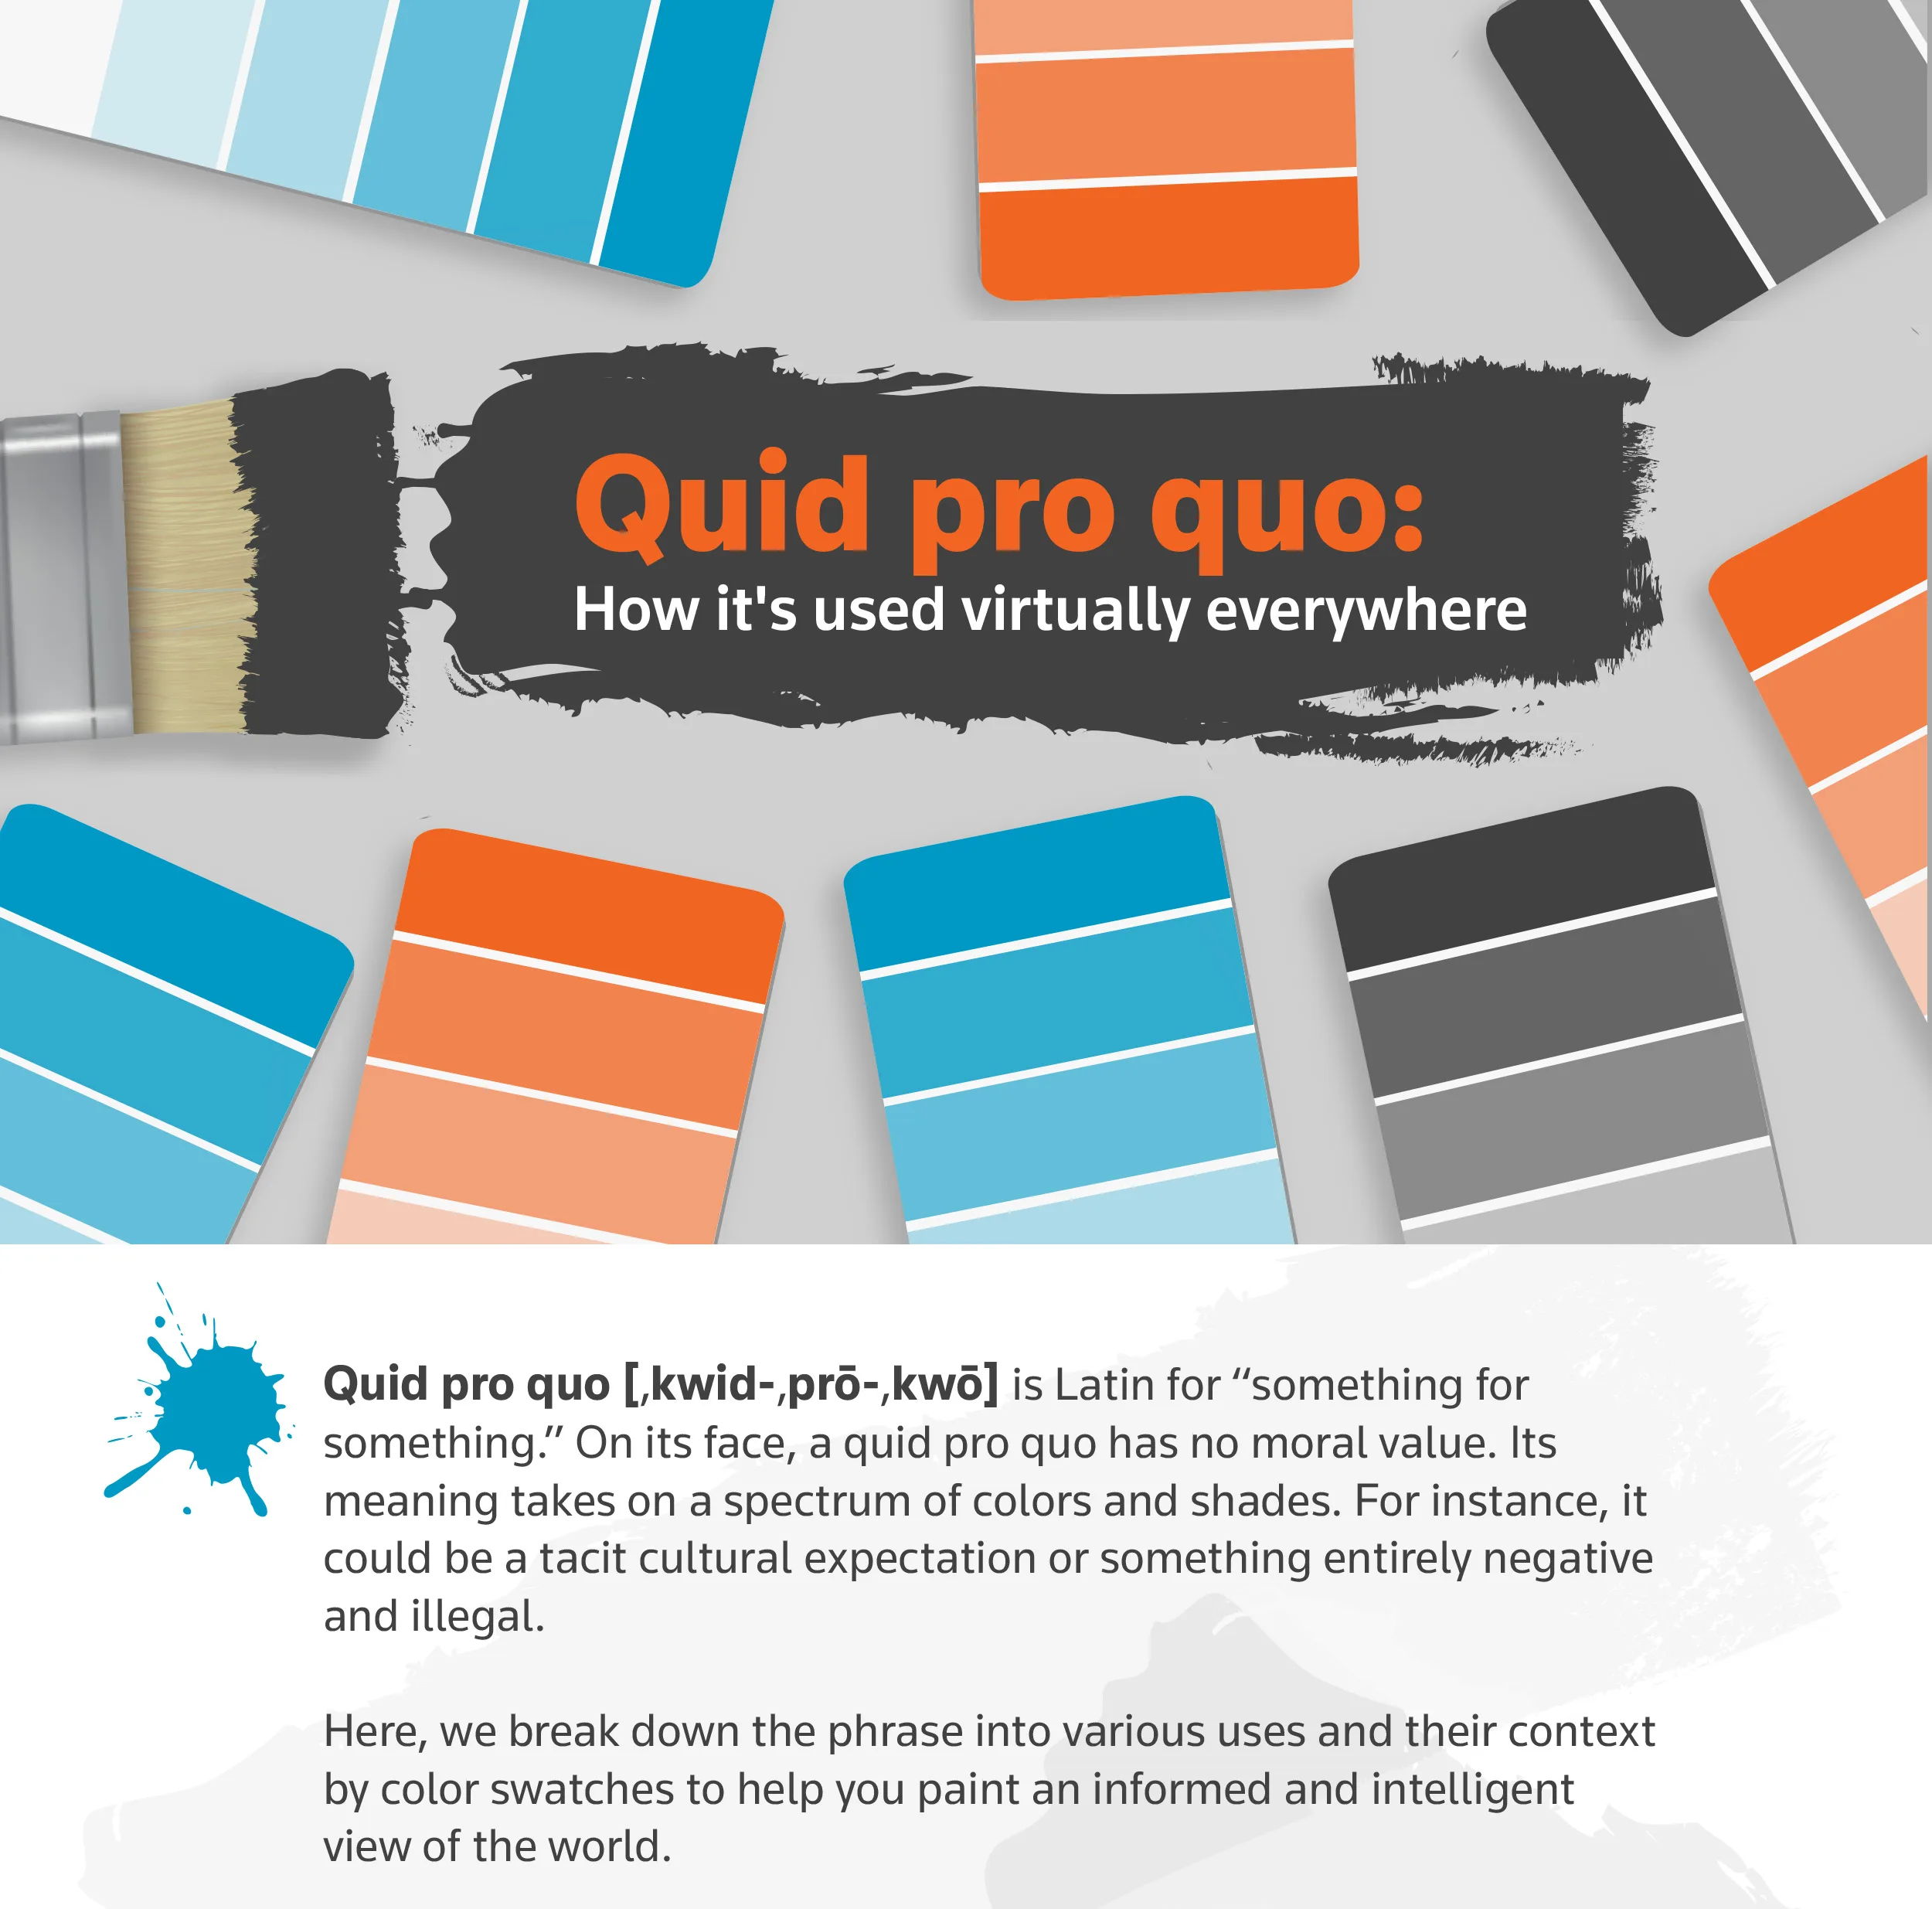 quid pro quo definition in graphic with pain swatch illustration